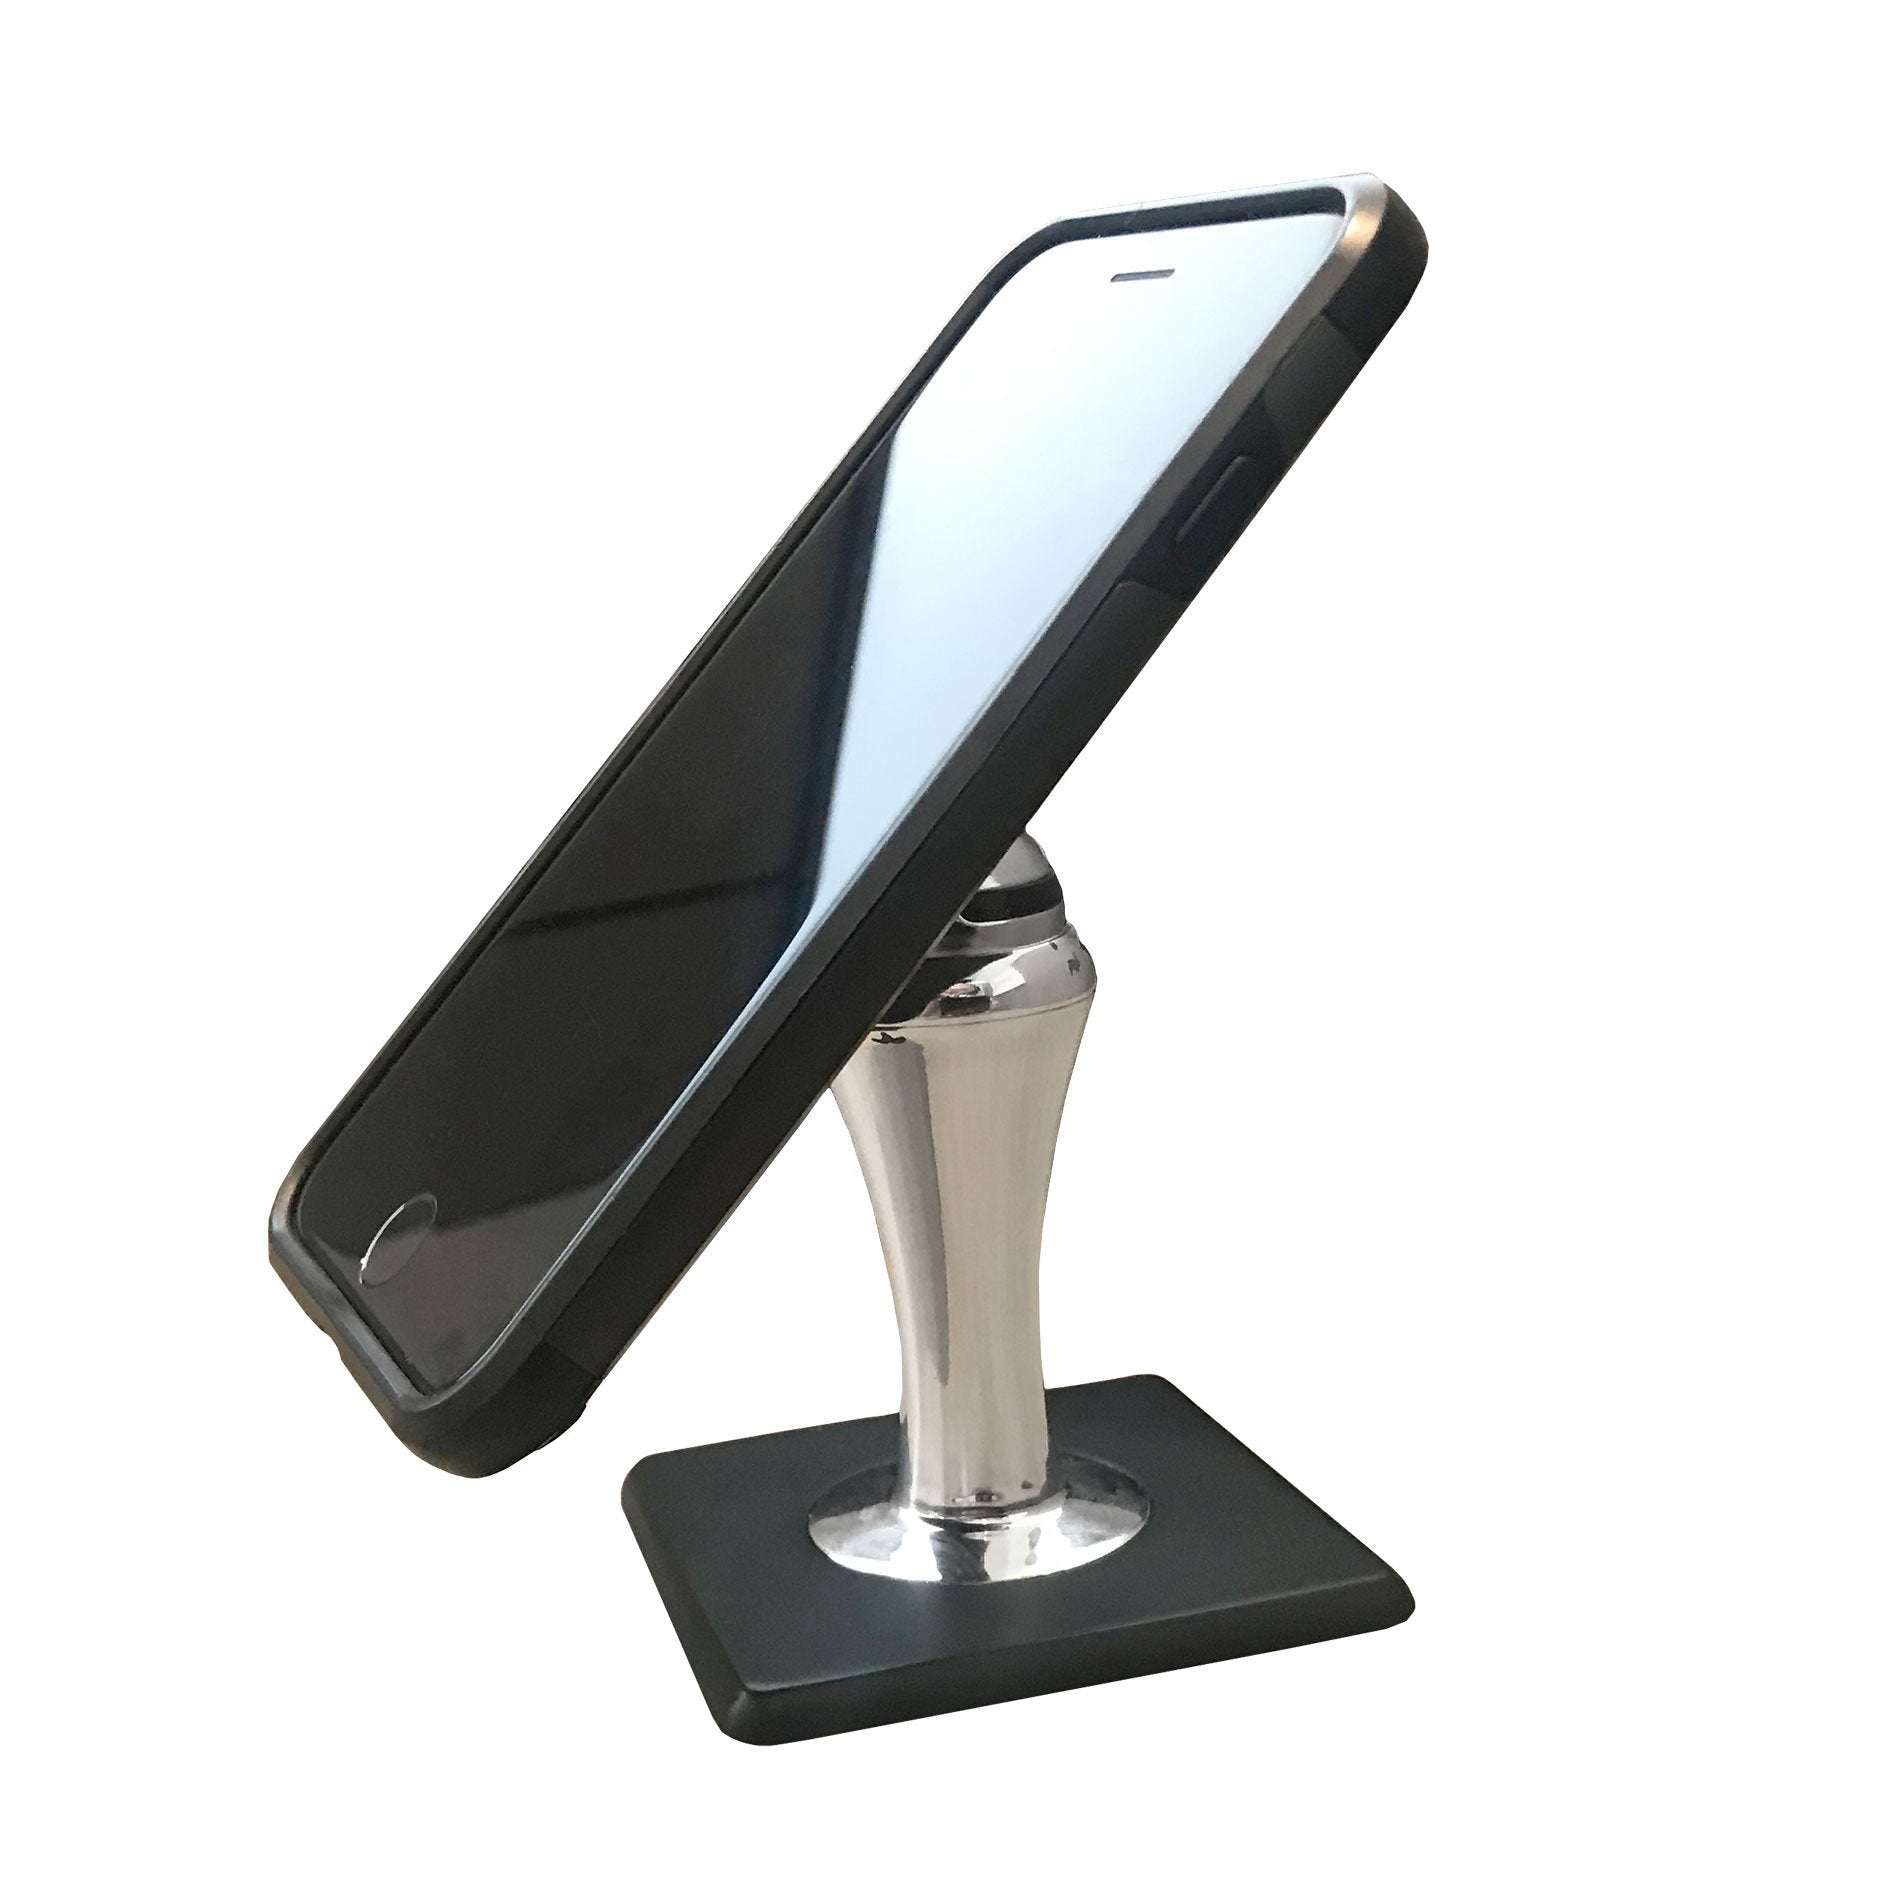 FastBall Magnetic Desk Mount with a smart phone in it isolated on a white background